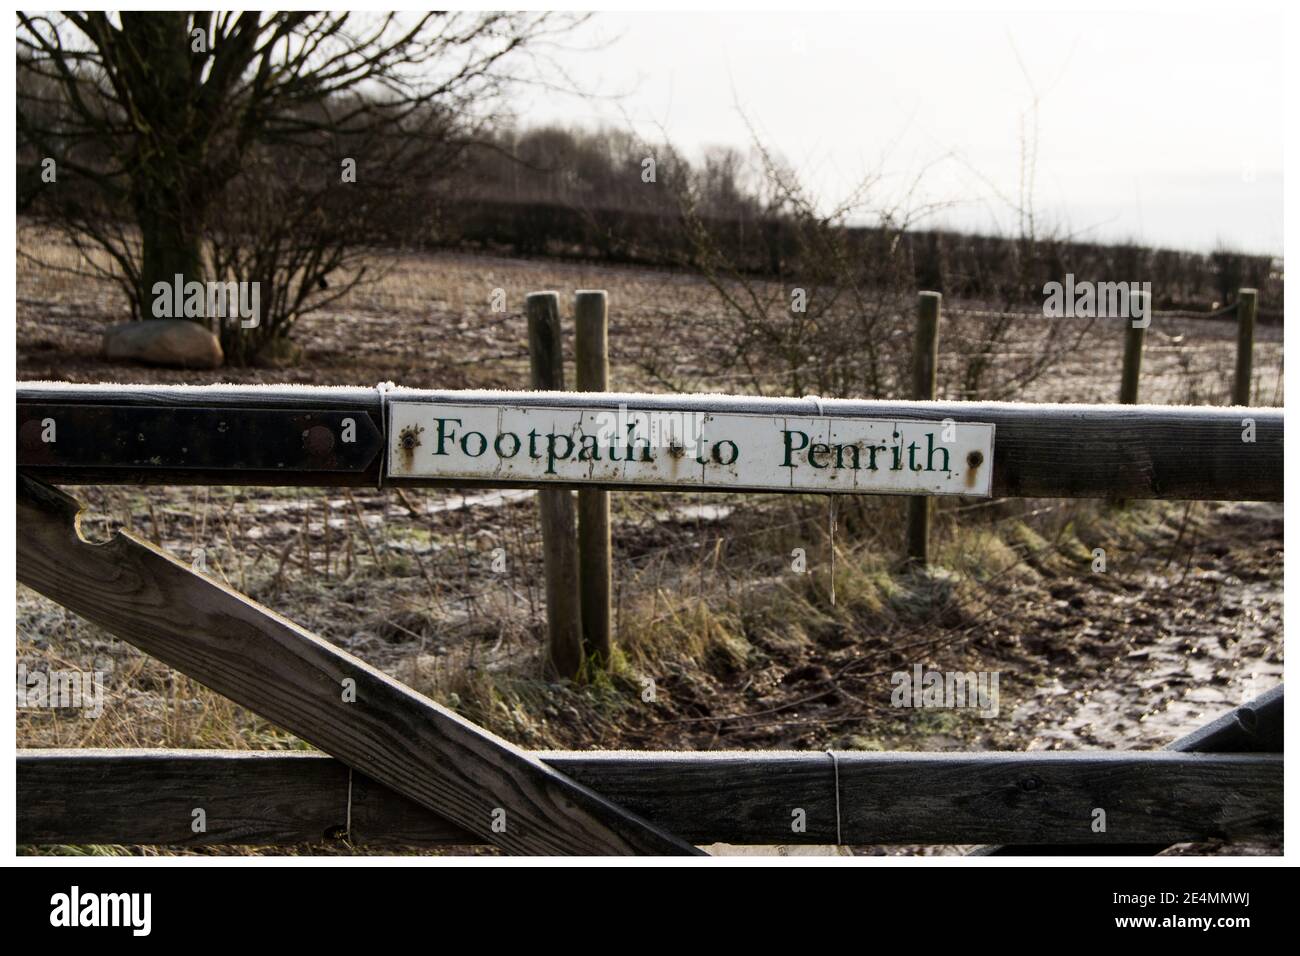 Footpath to Penrith sign on a five bar gate Stock Photo